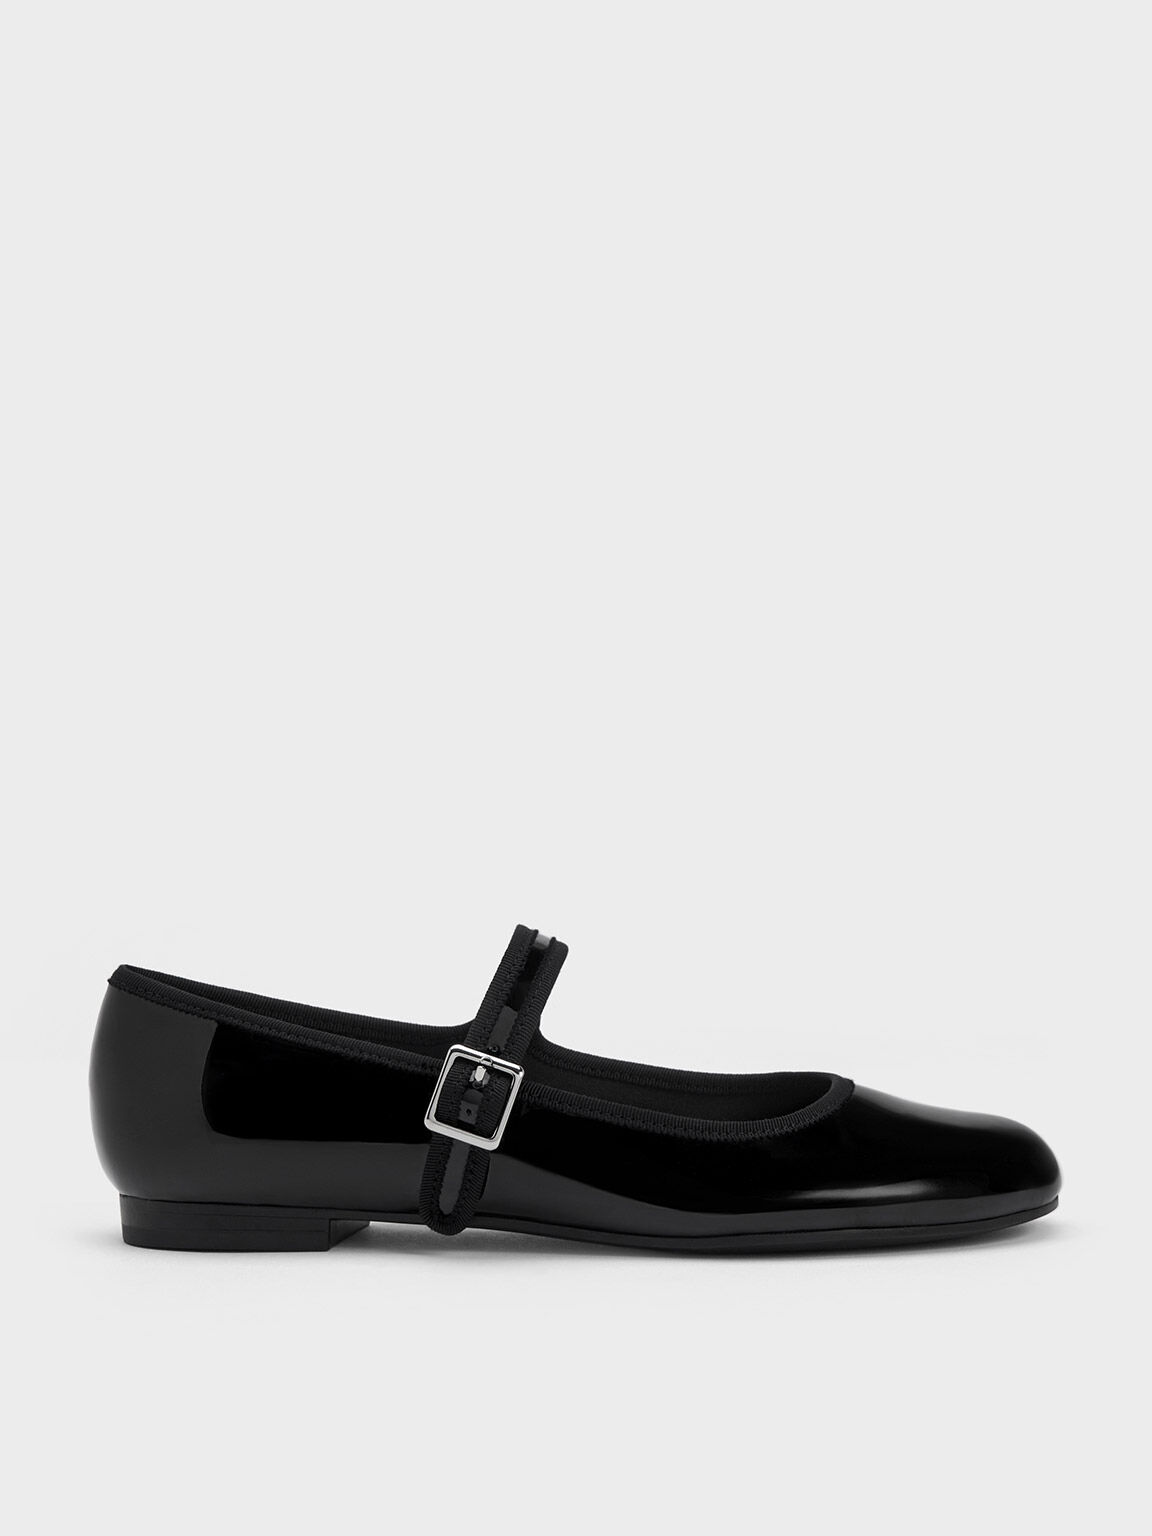 Black Patent Buckled Mary Jane Flats - CHARLES & KEITH SG